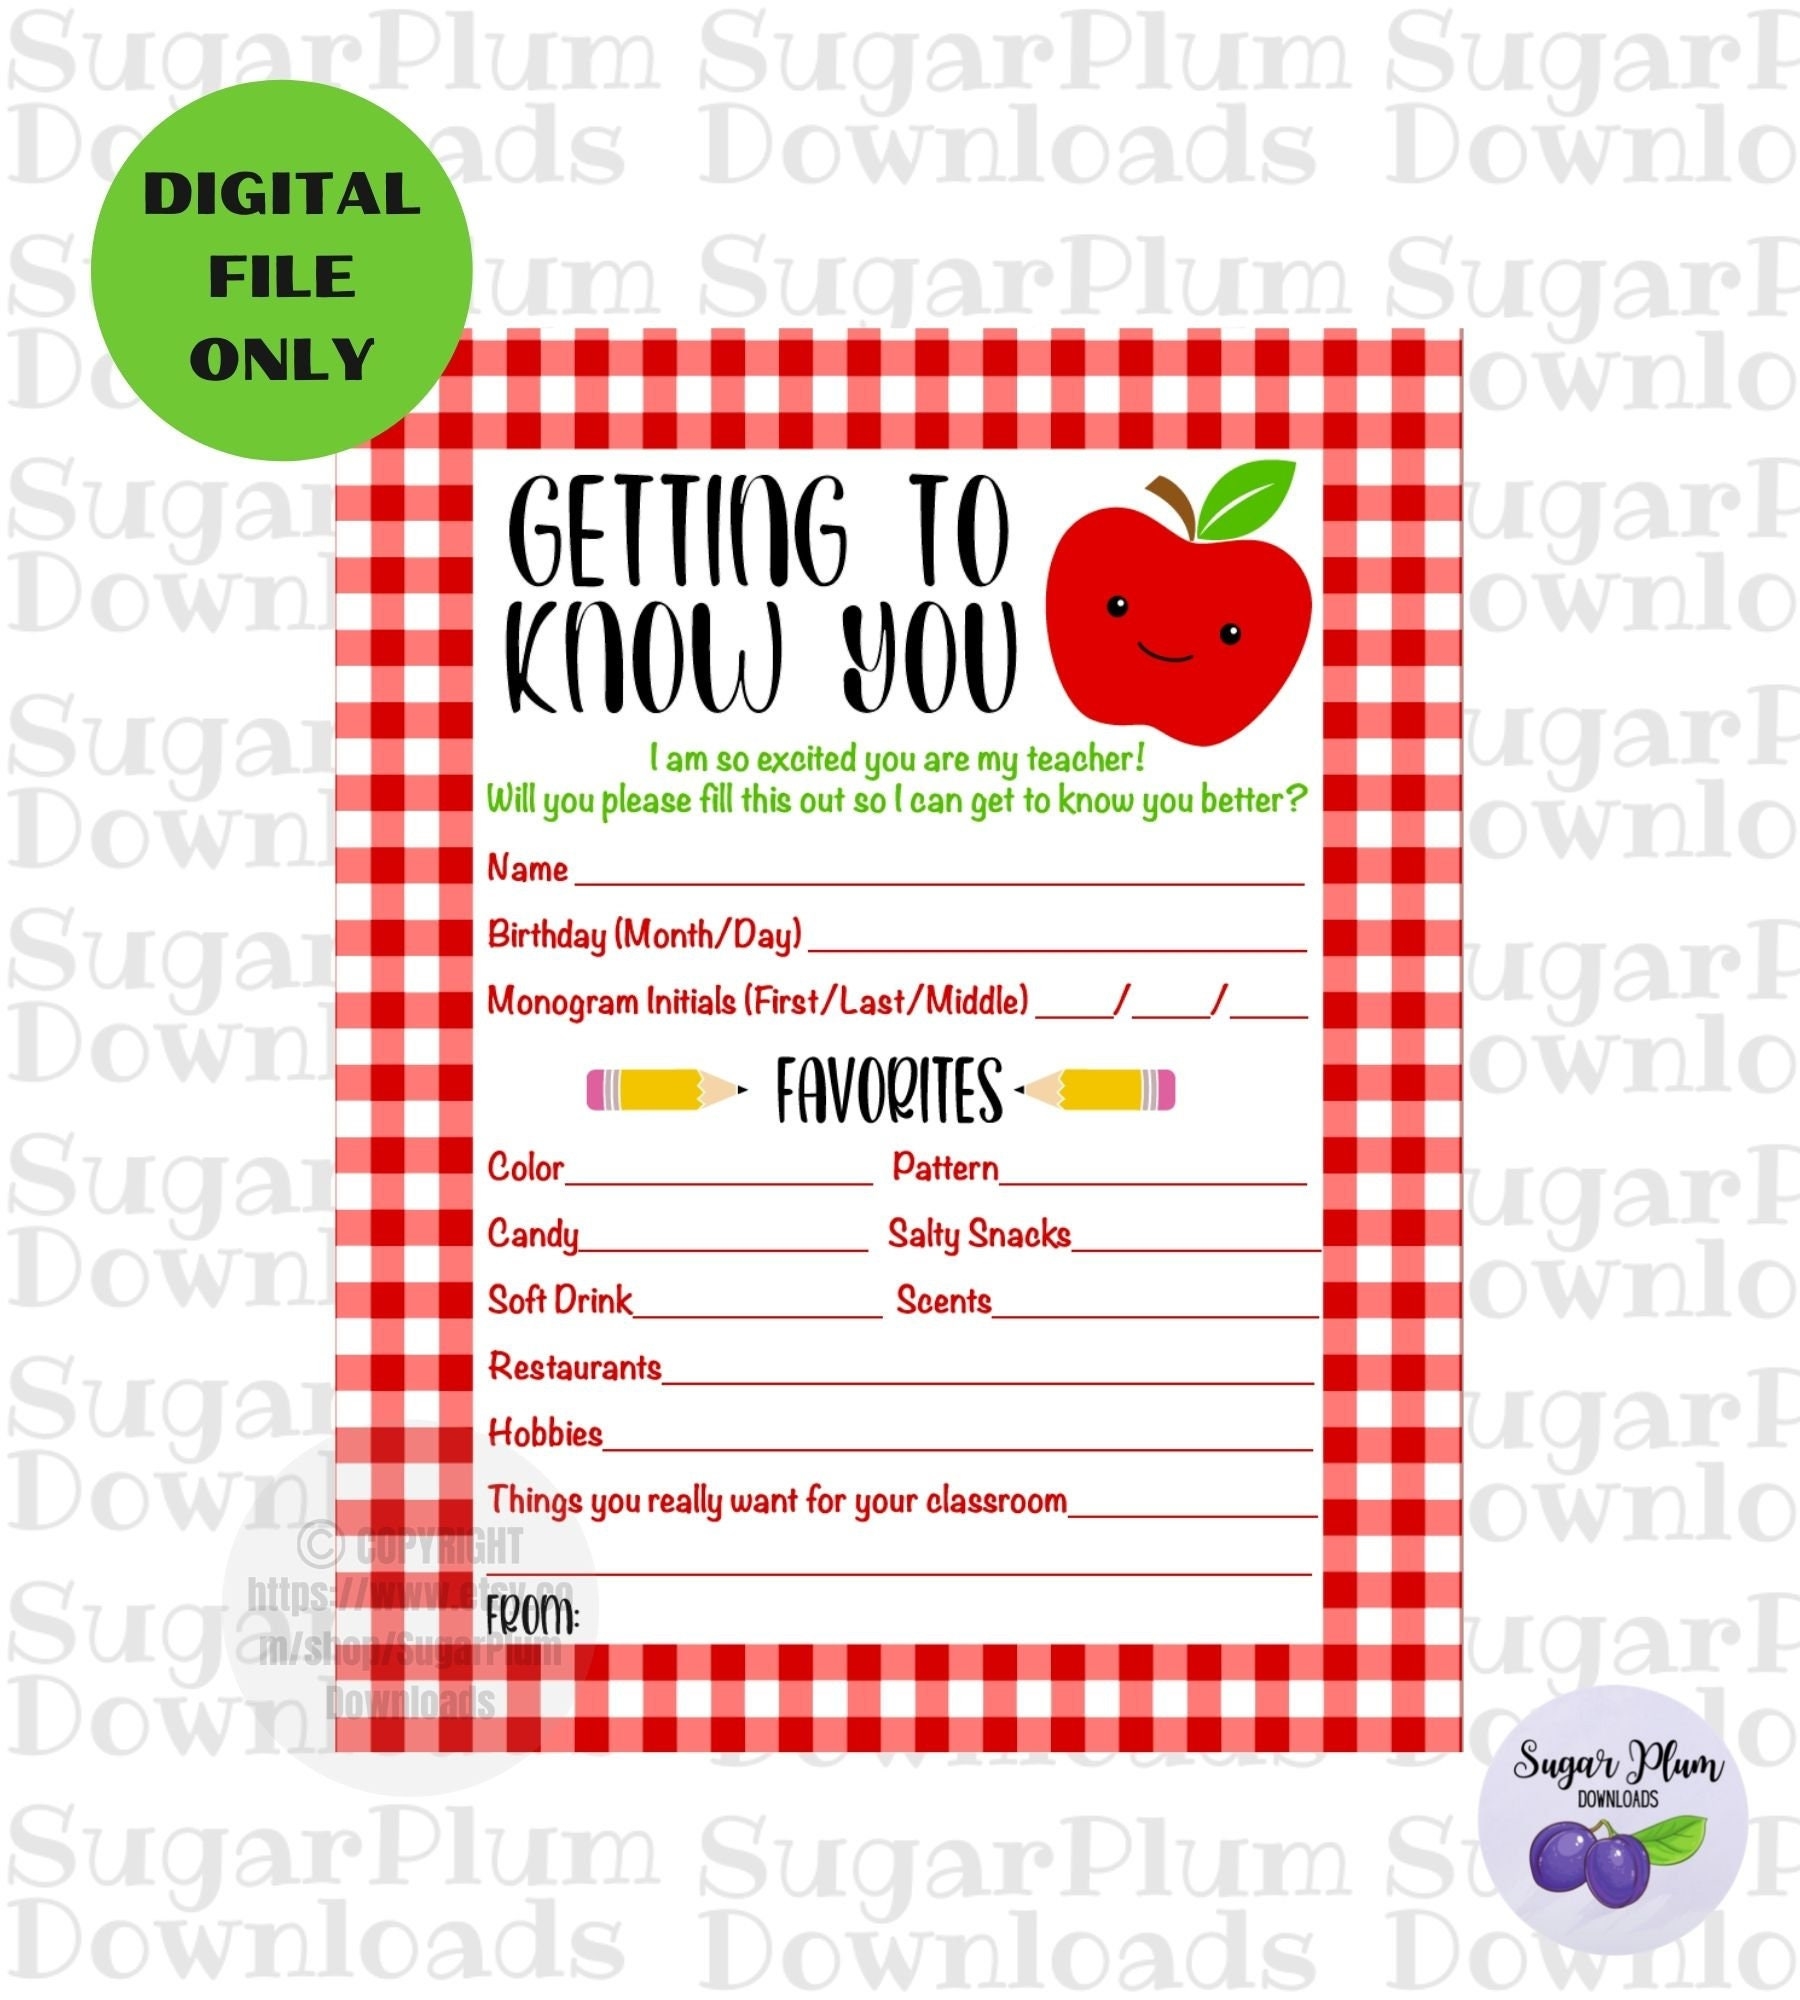 Getting To Know You Teacher Printable Teachers Favorite Things Back To School Teacher Questionnaire Digital File Instant Download Etsy